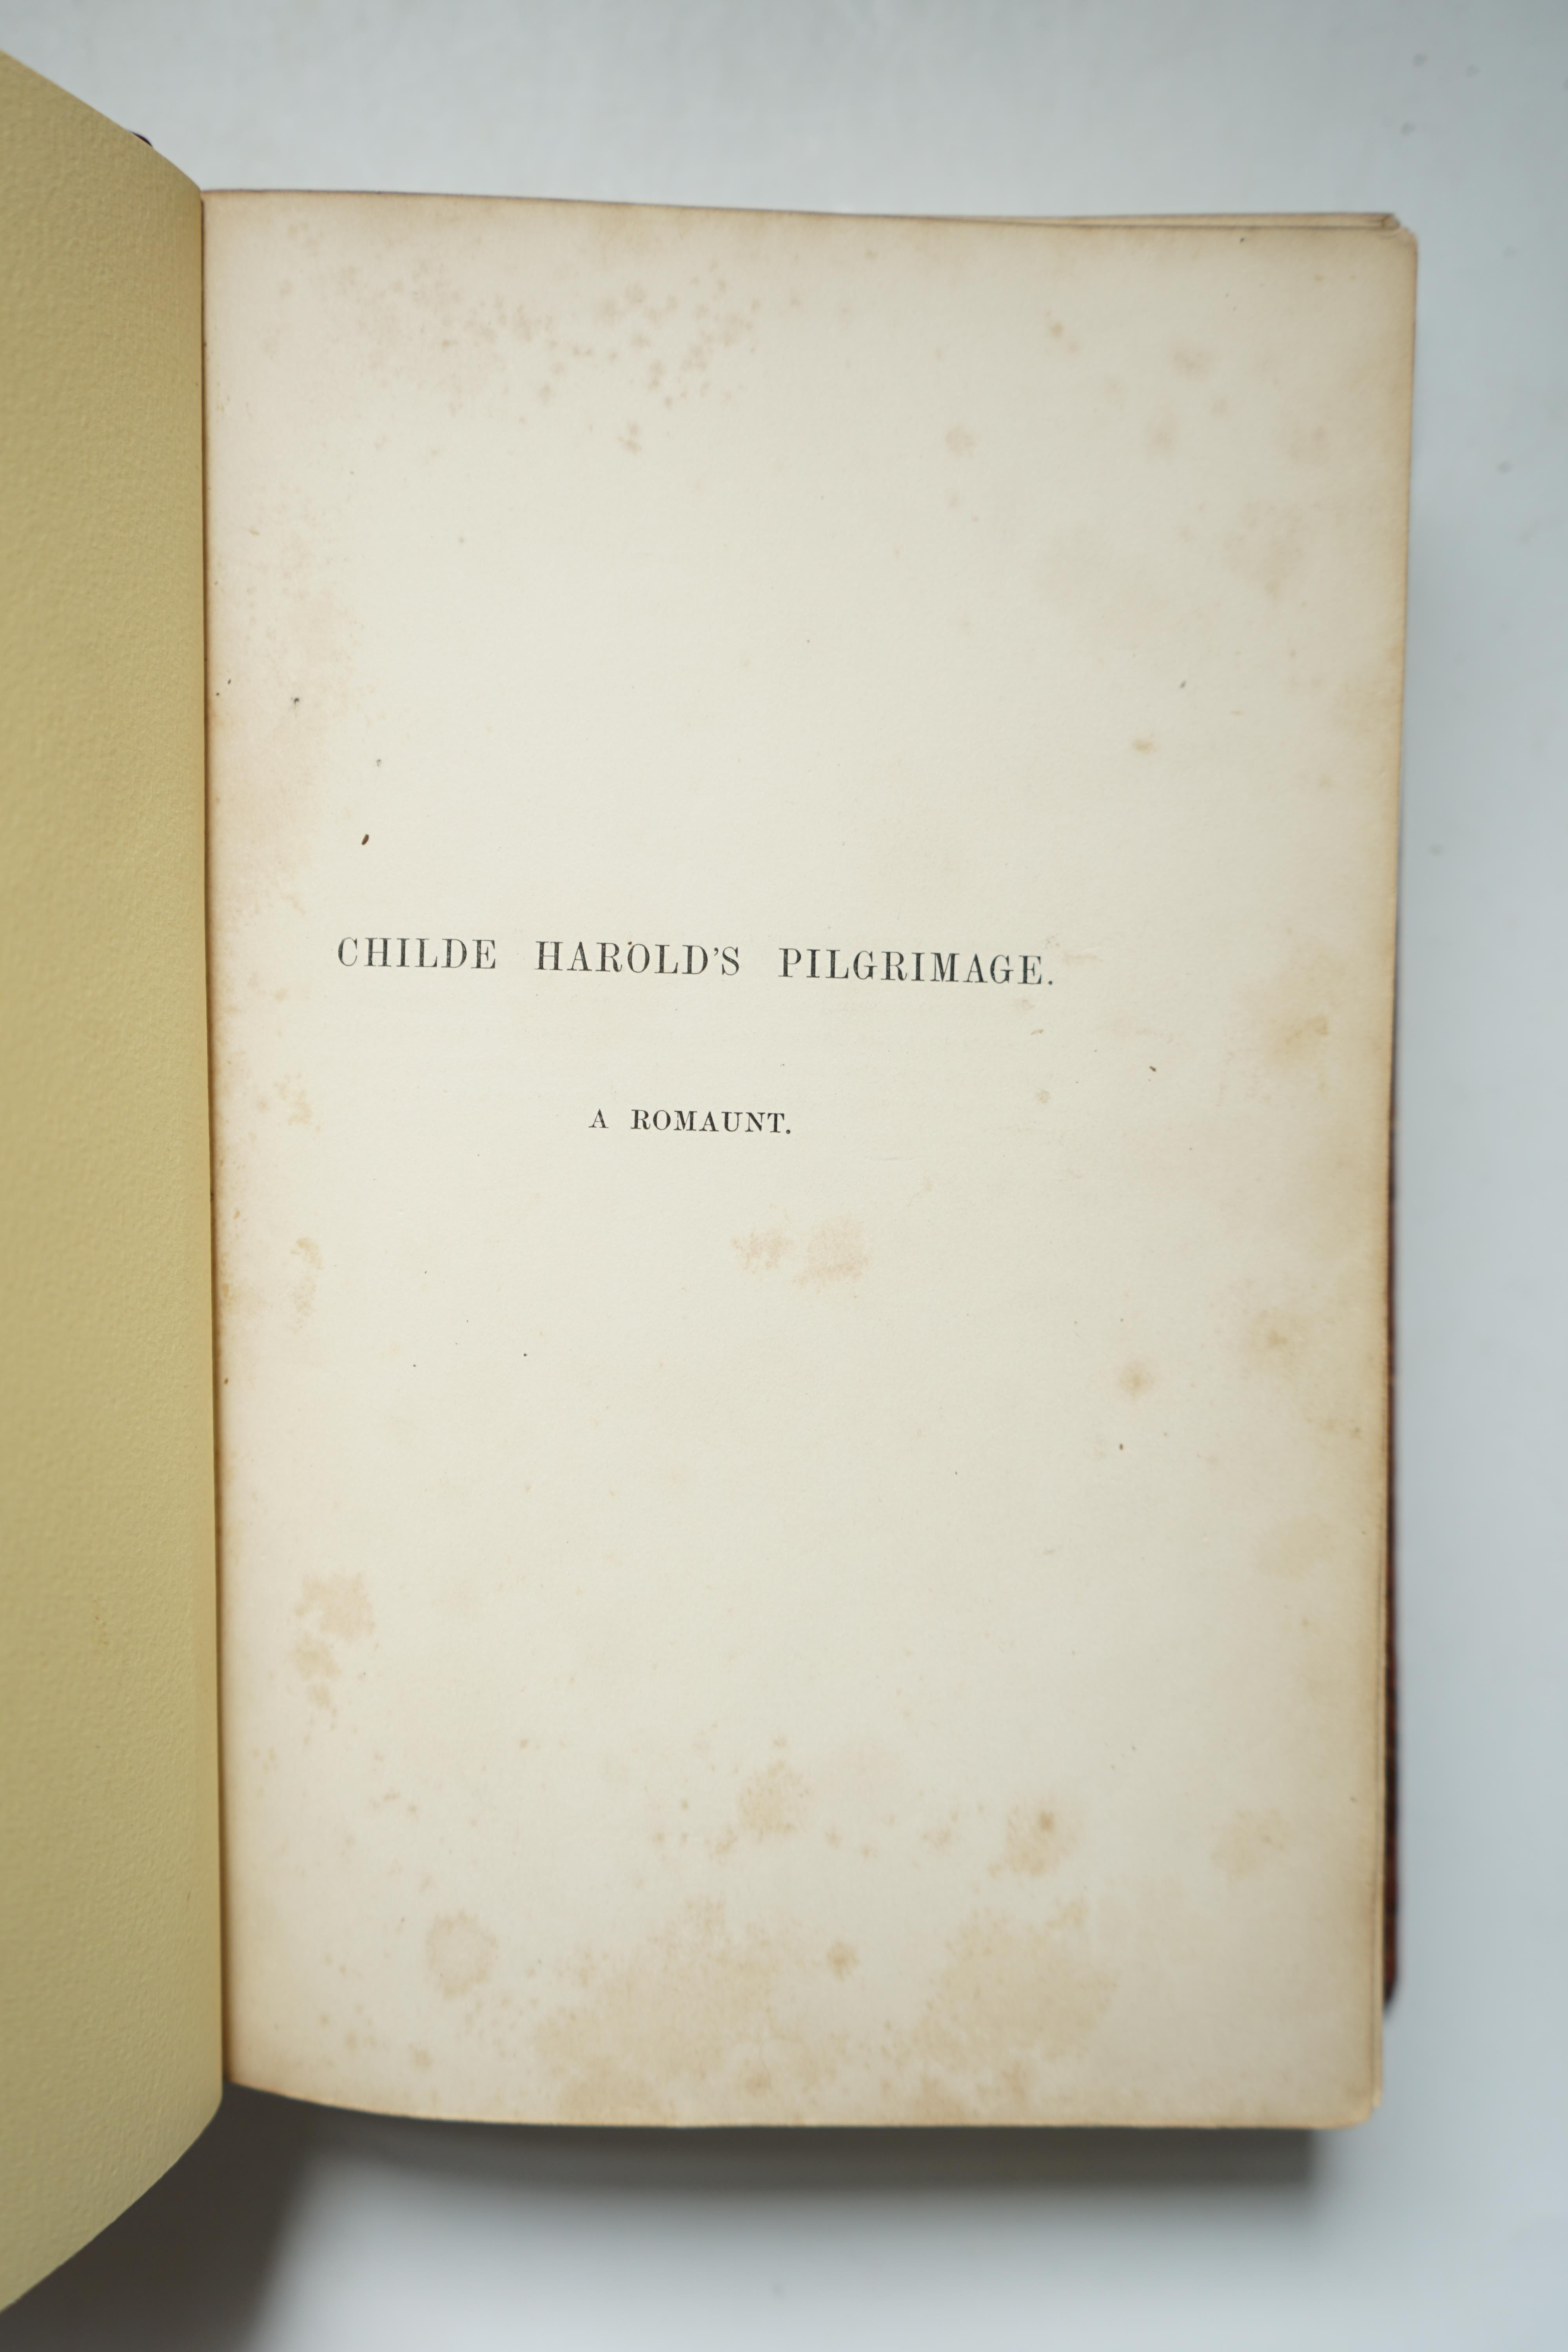 Byron, George Gordon Noel, Lord - Childe Harold’s Pilgrimage, with portrait frontis, engraved title and 60 vignettes by the brothers Finden, folding map at end 8vo, rebacked gilt tooled calf, endpapers renewed, John Murr